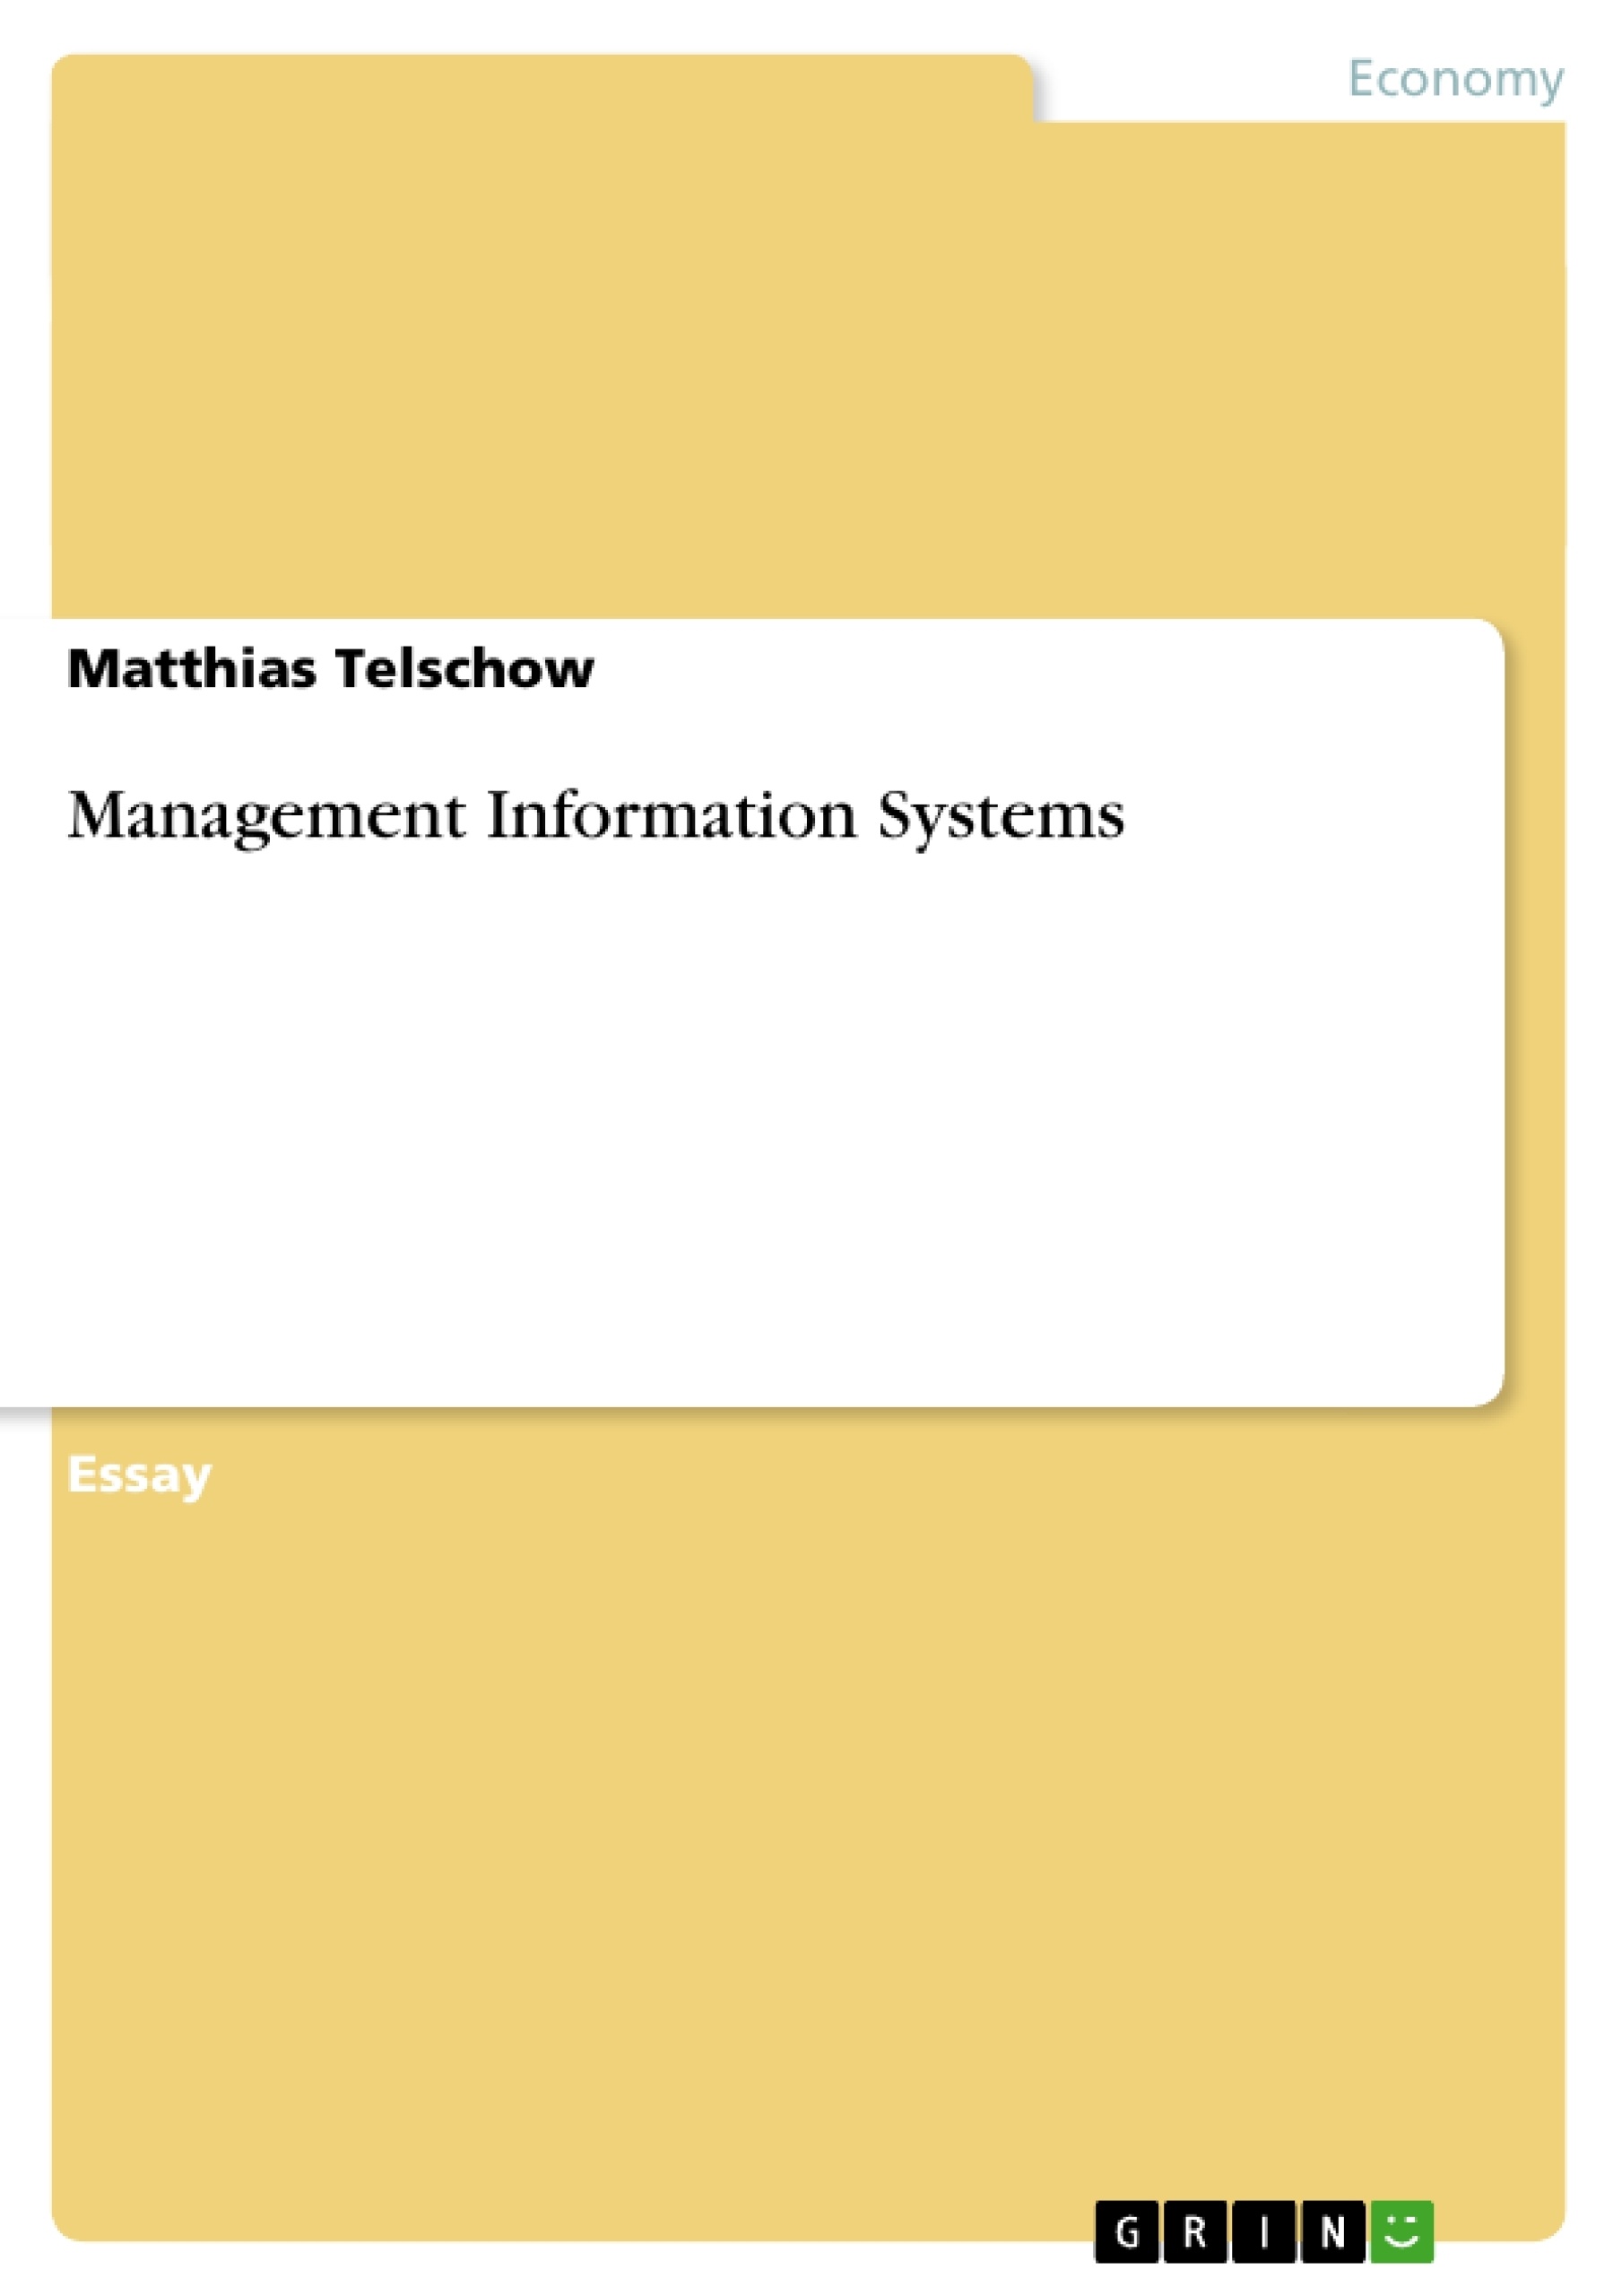 Title: Management Information Systems